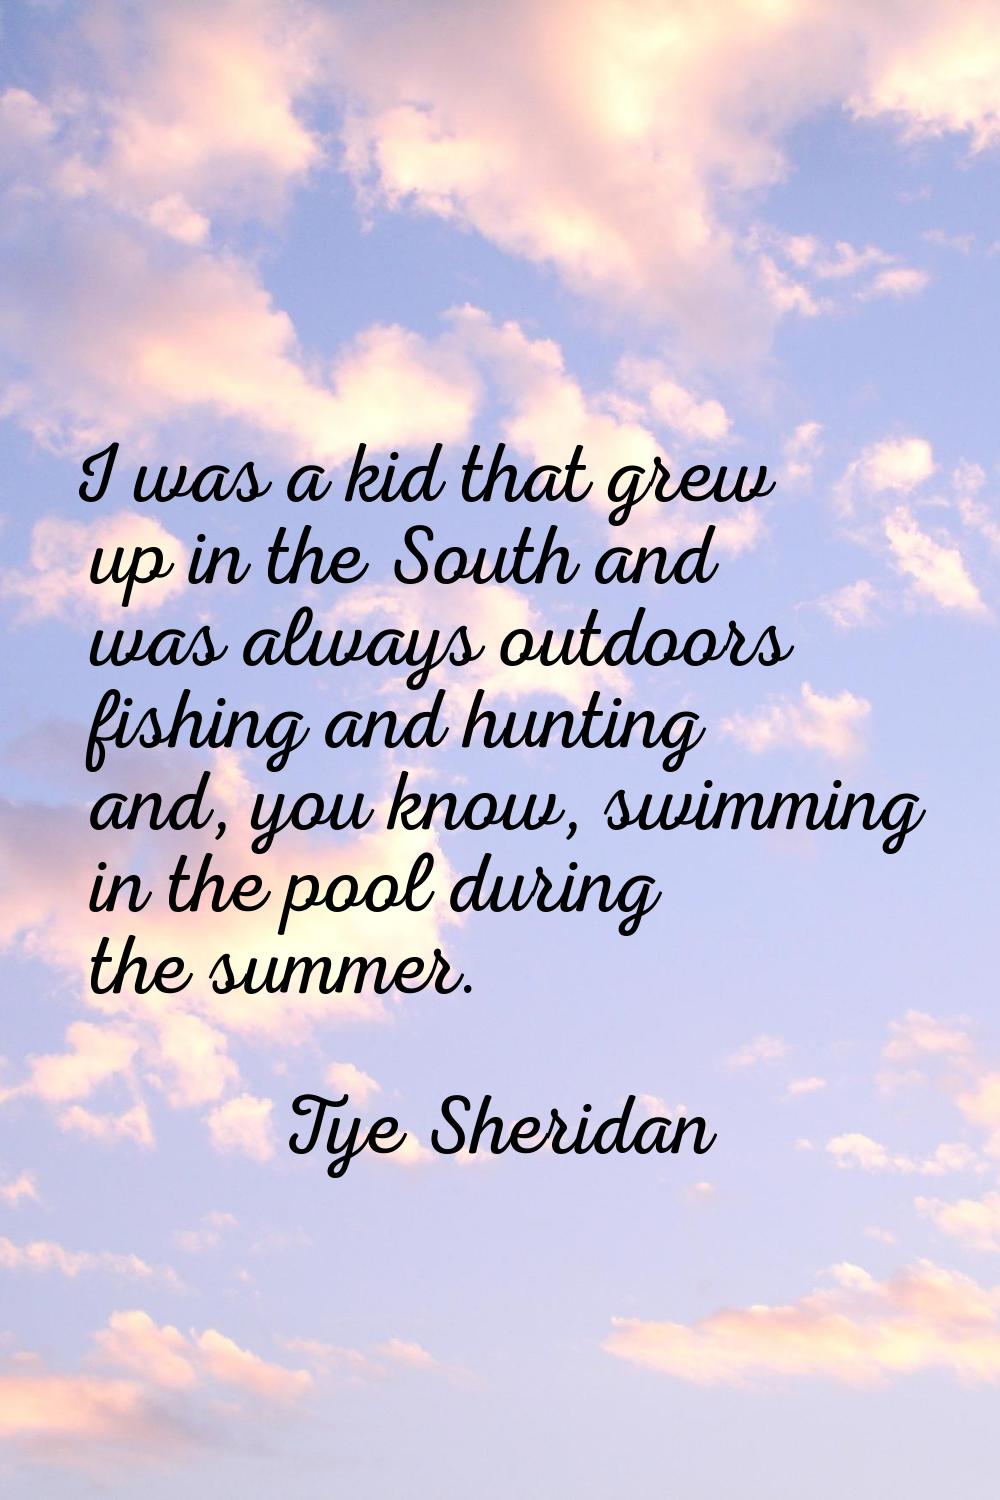 I was a kid that grew up in the South and was always outdoors fishing and hunting and, you know, sw